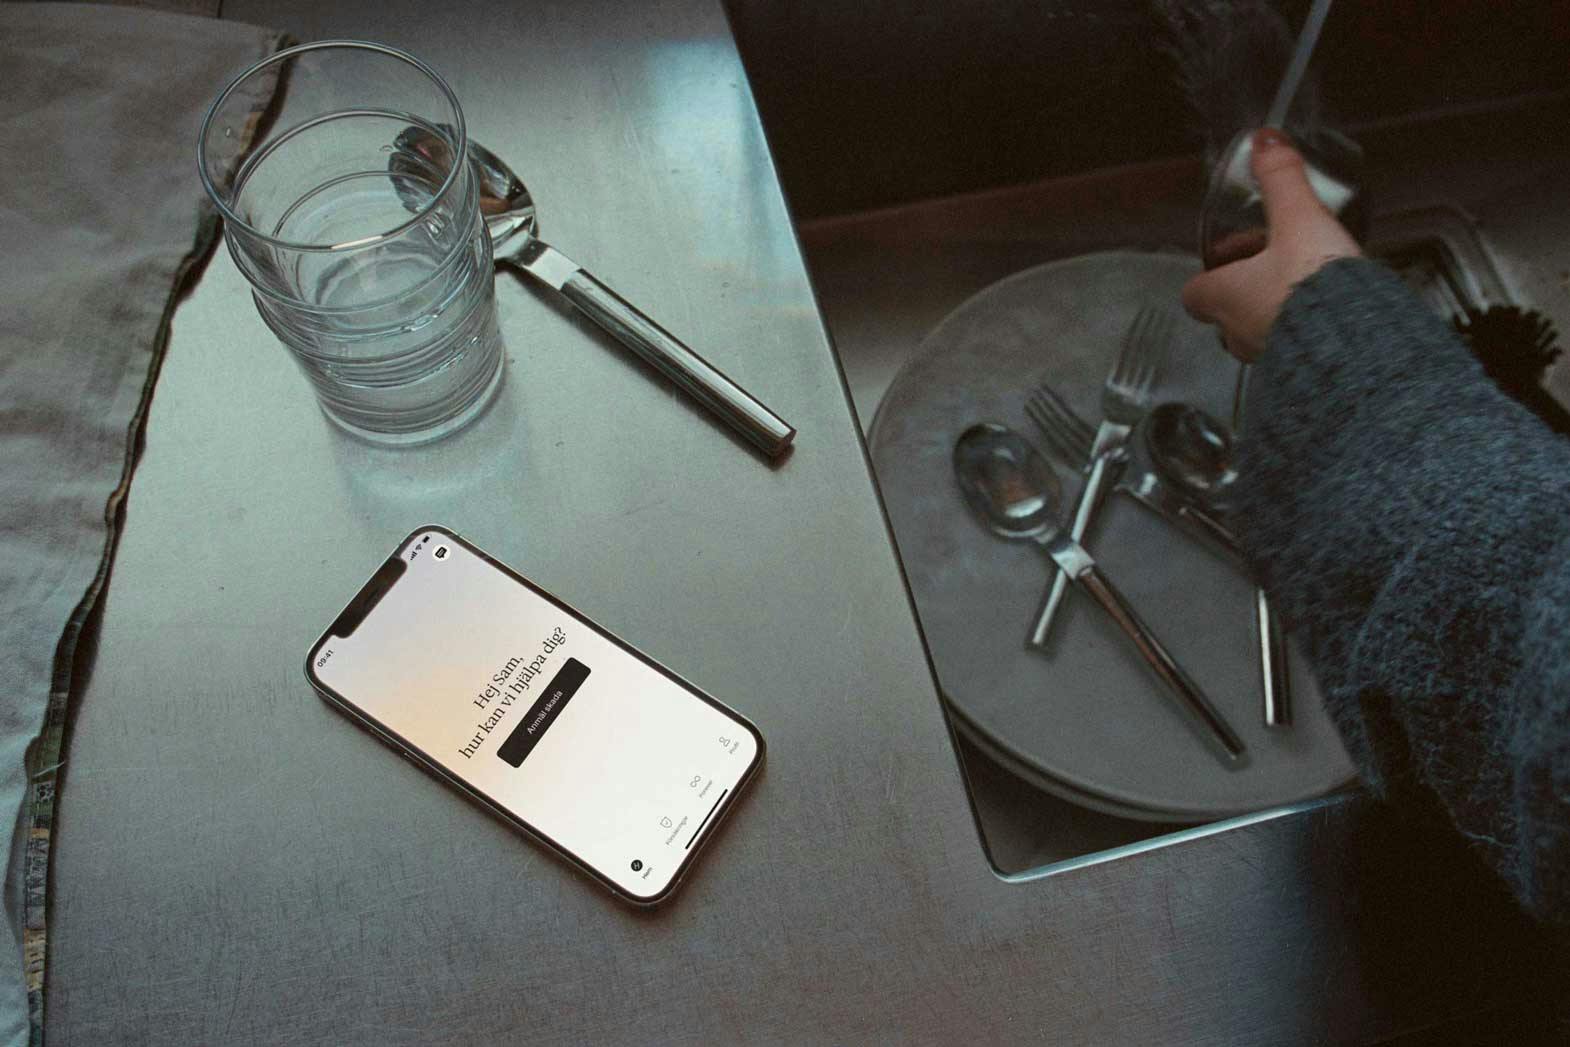 A phone on a kitchen counter next to a sink